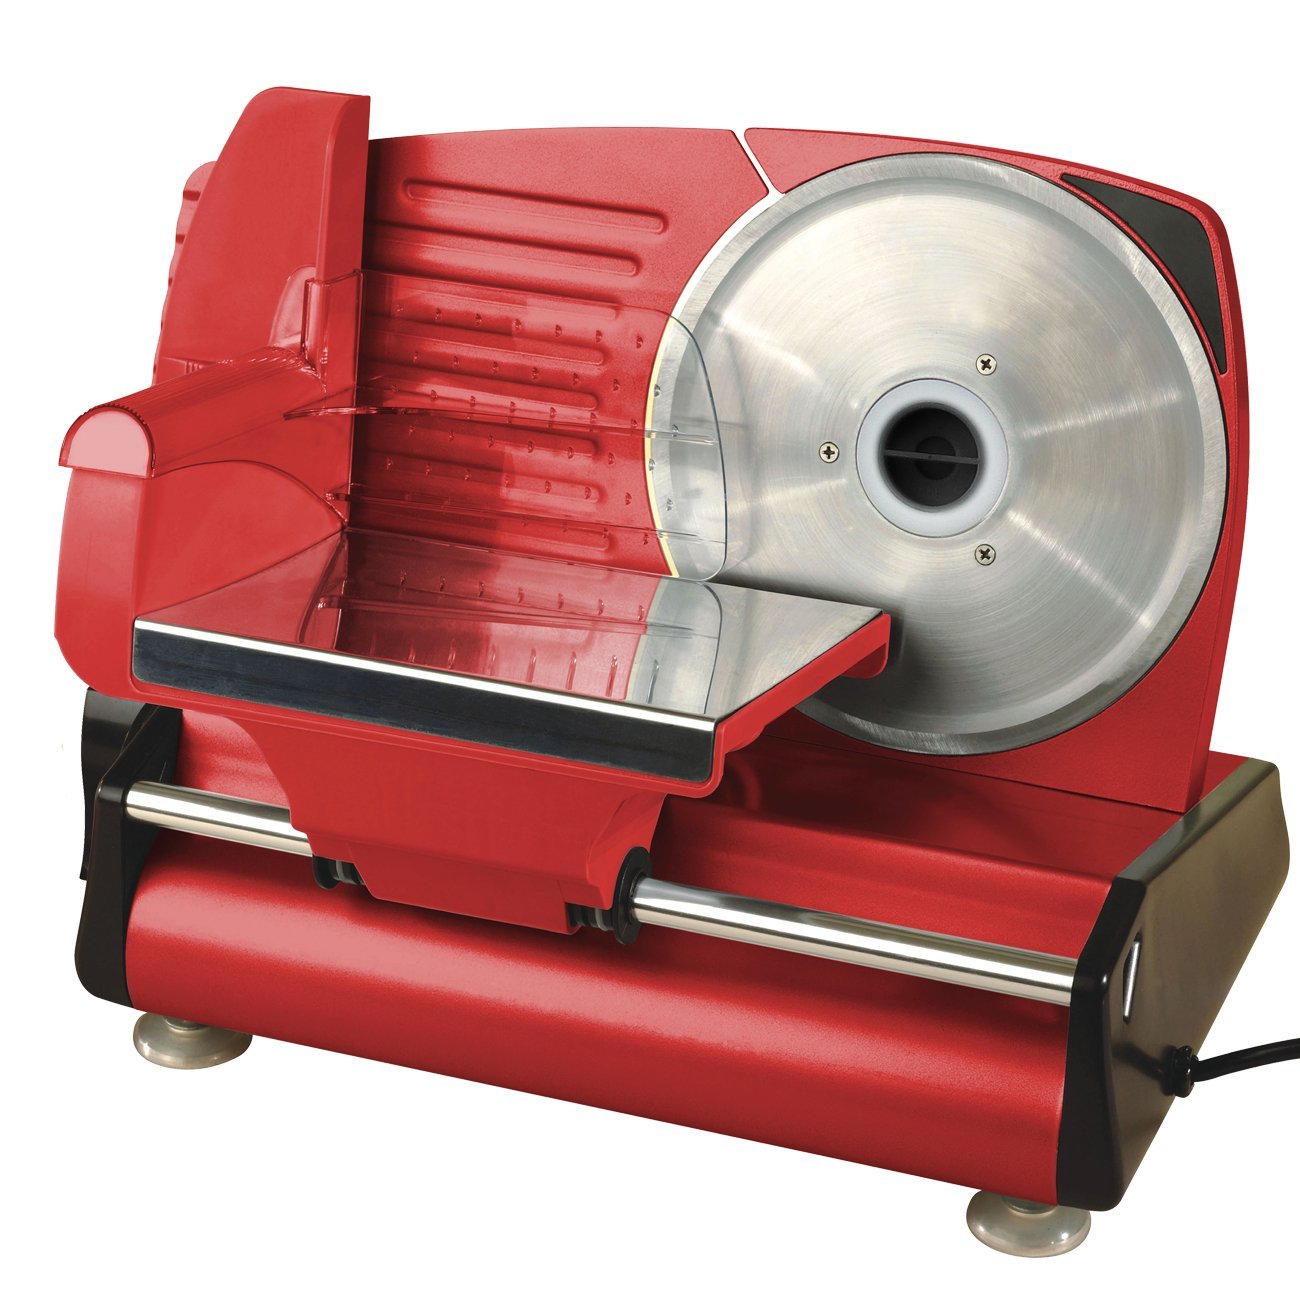 TSM Products 62109 All Purpose Meat Slicer Review